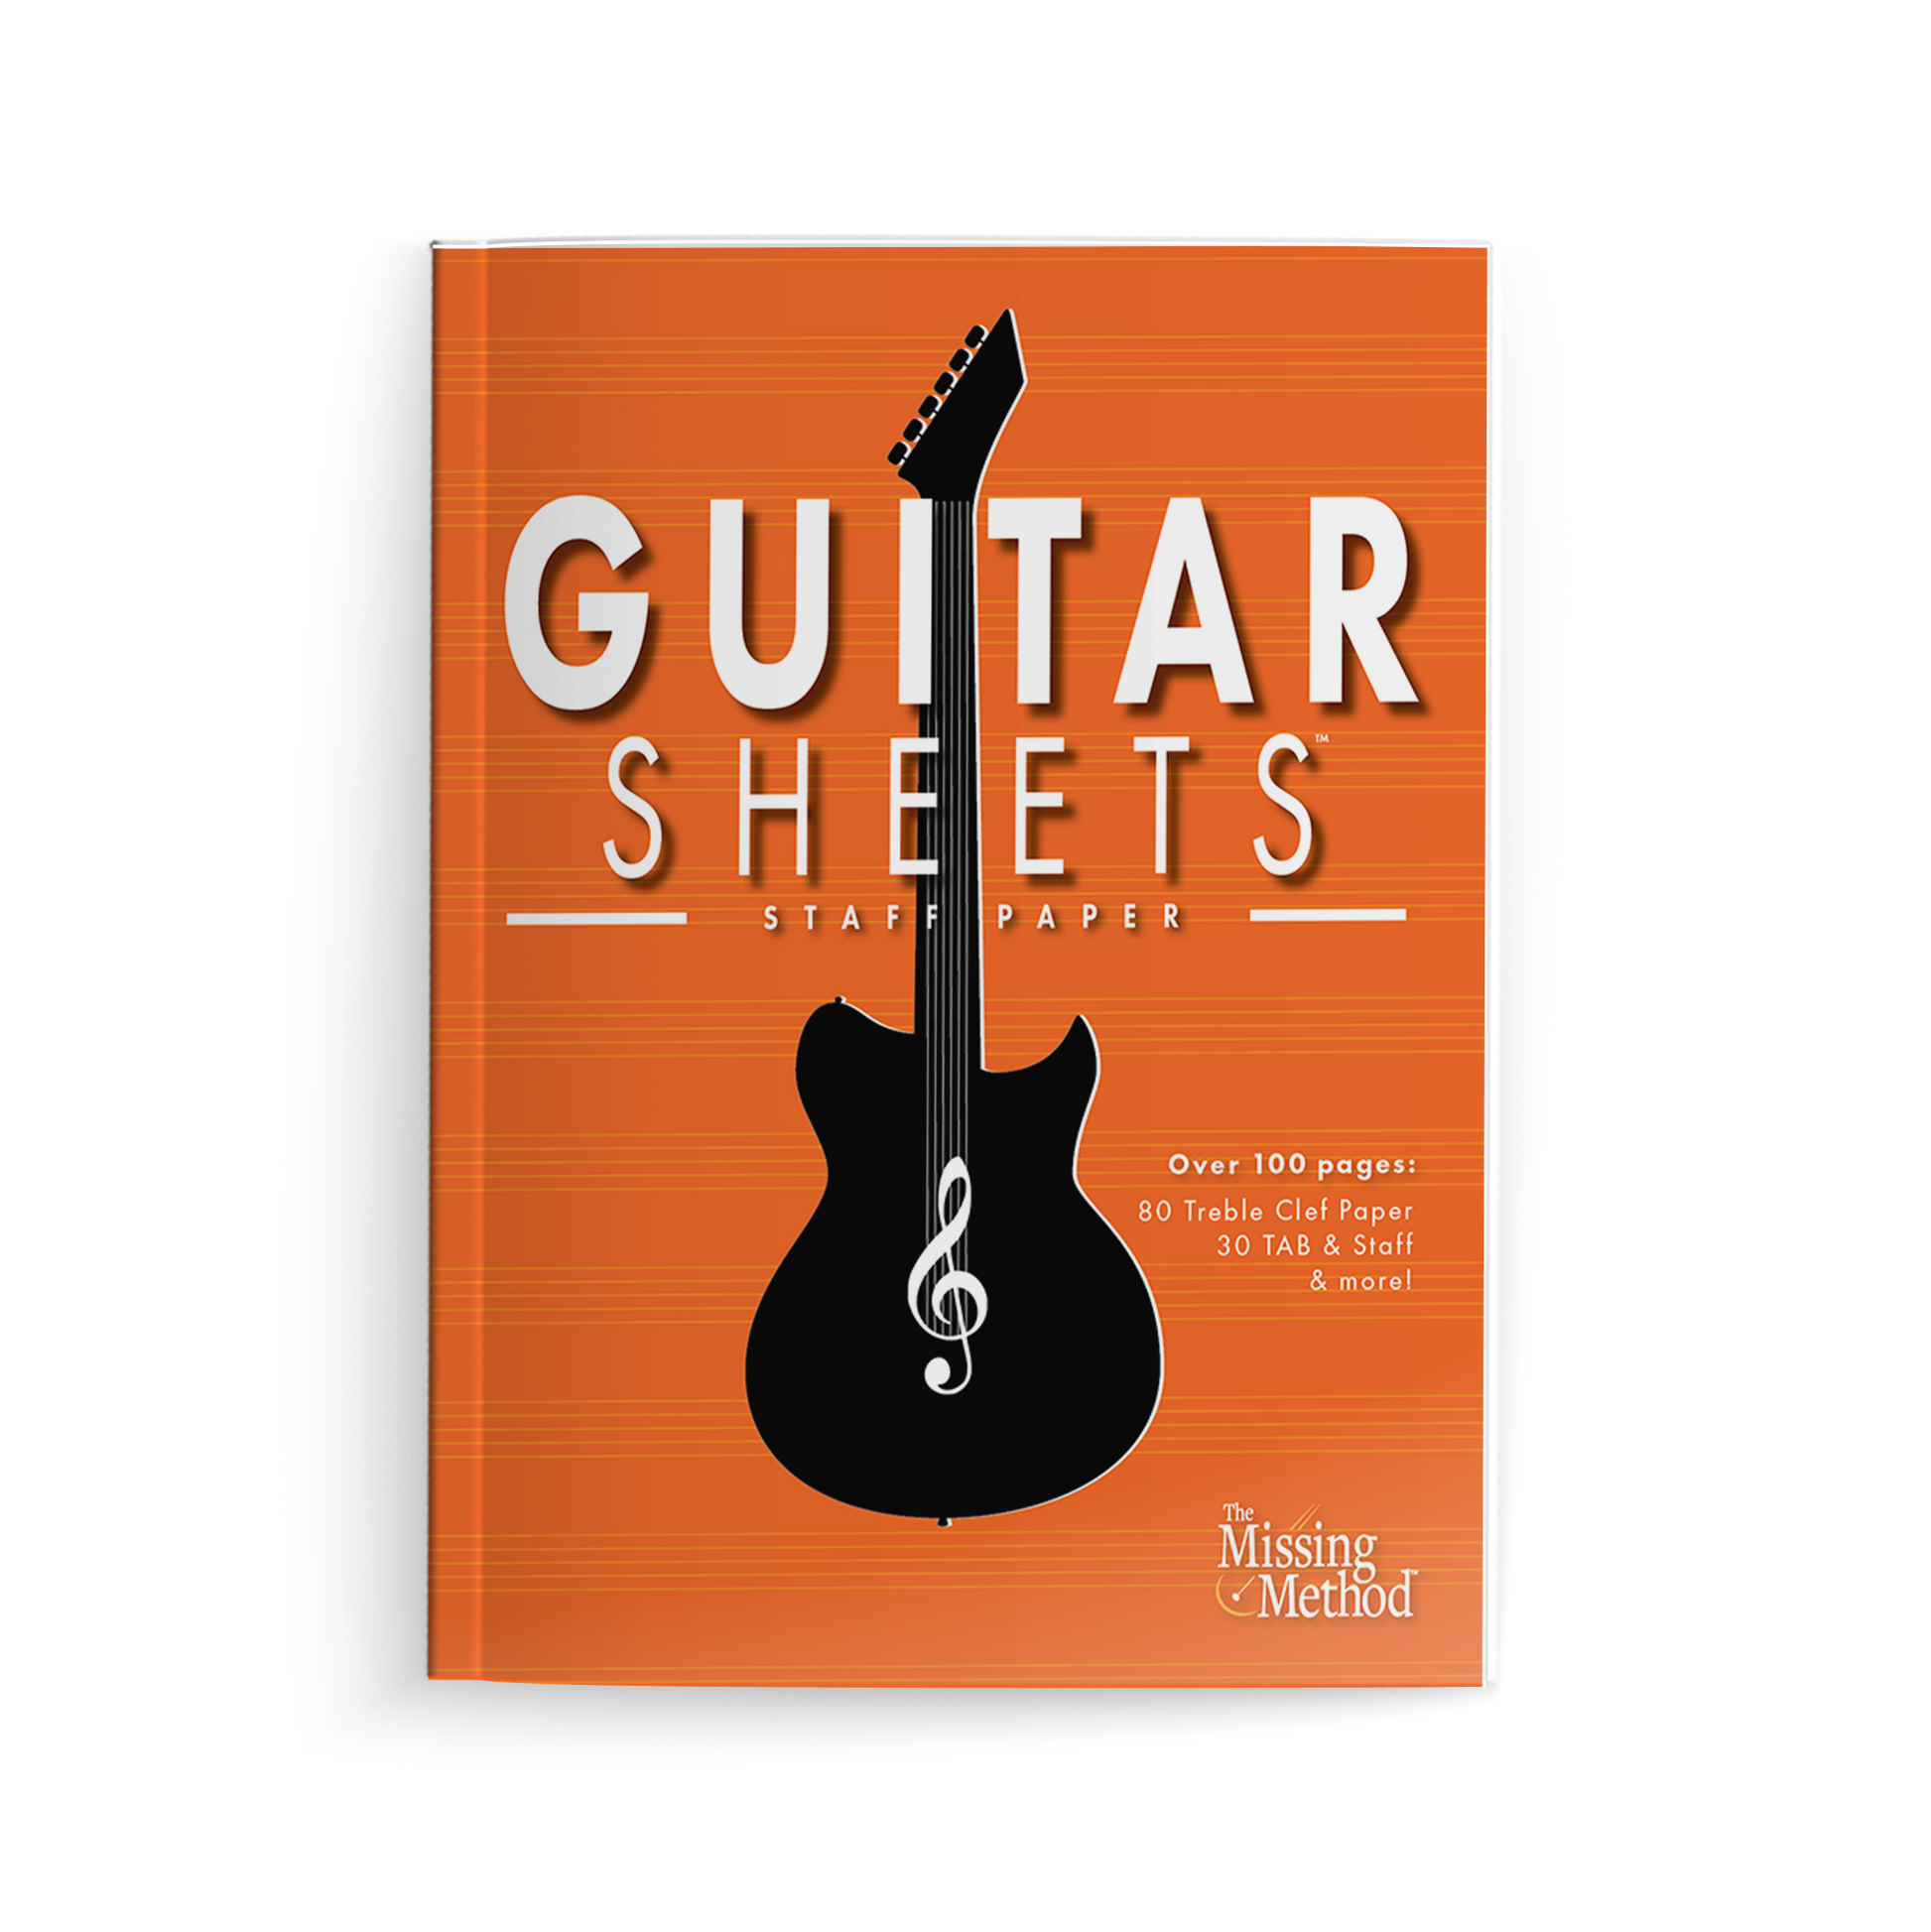 Guitar Sheets Staff Paper, Paperback book from The Missing Method for Guitar, front cover. Copyright 2024 Tenterhook Books, LLC.